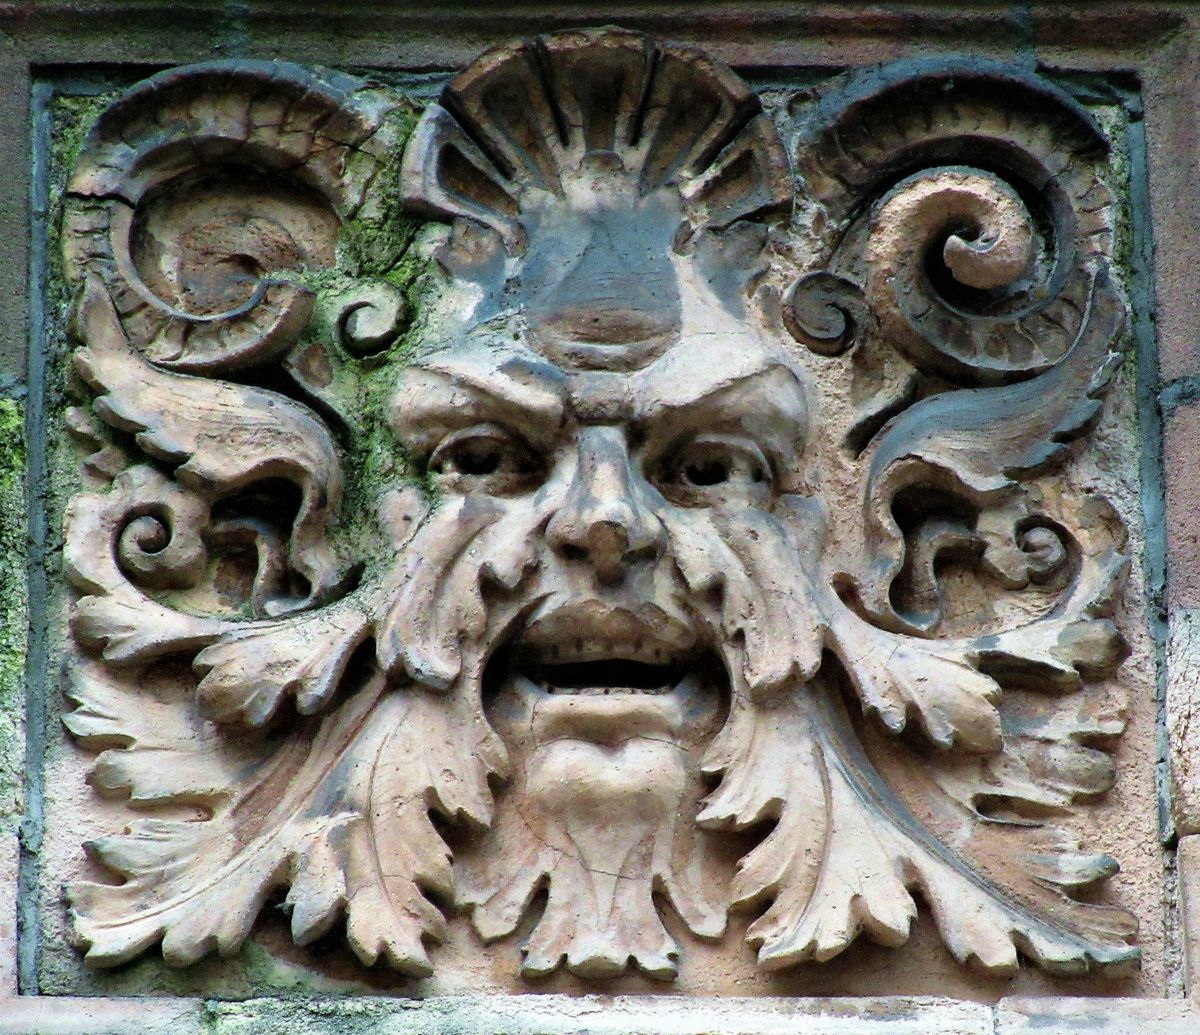 The Green Man: The Carvings and The Debate